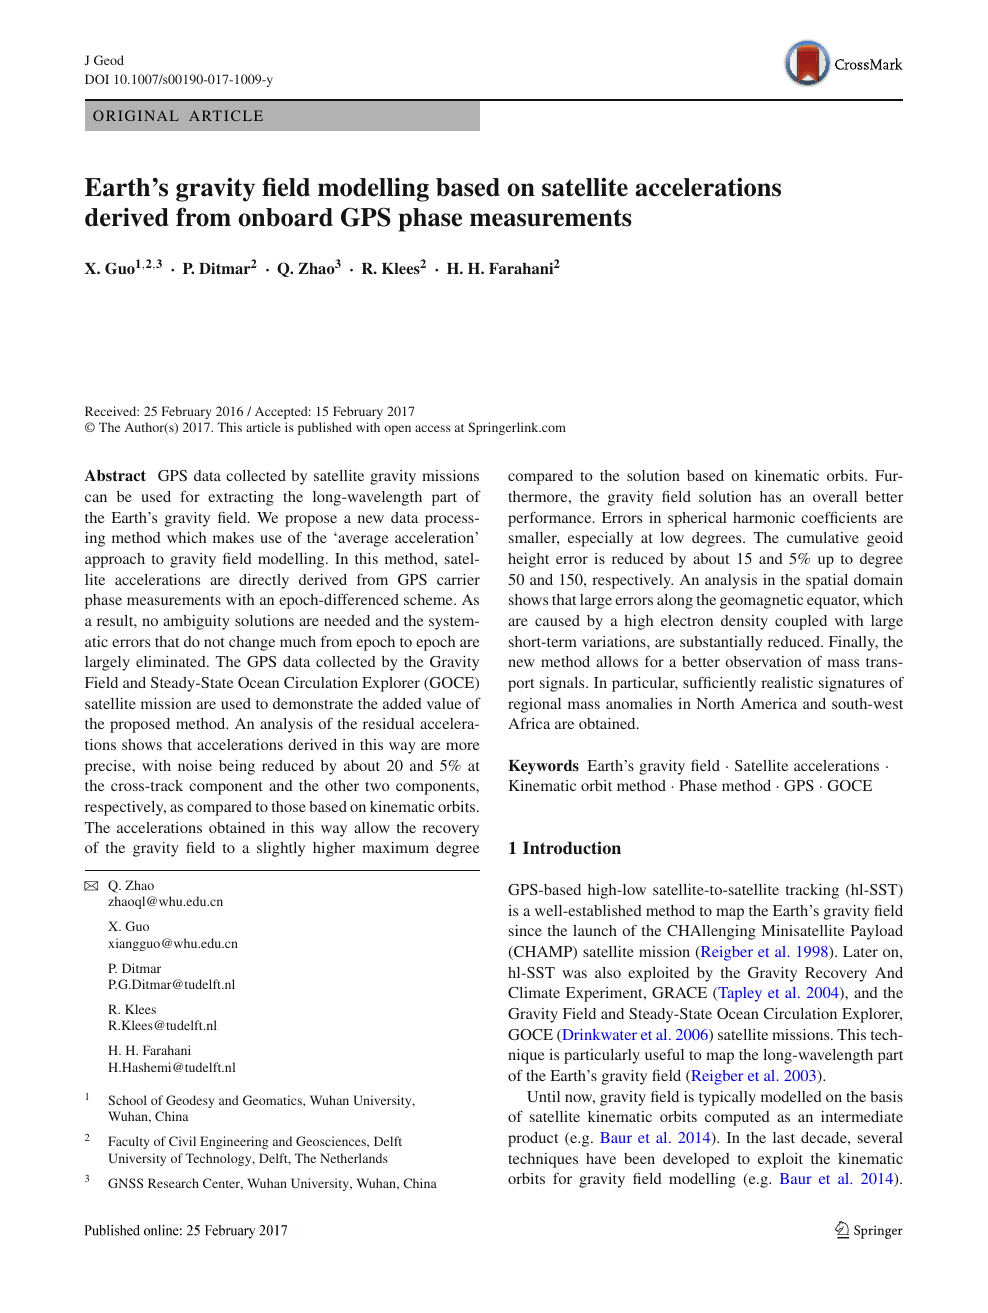 Earth S Gravity Field Modelling Based On Satellite Accelerations Derived From Onboard Gps Phase Measurements Topic Of Research Paper In Physical Sciences Download Scholarly Article Pdf And Read For Free On Cyberleninka